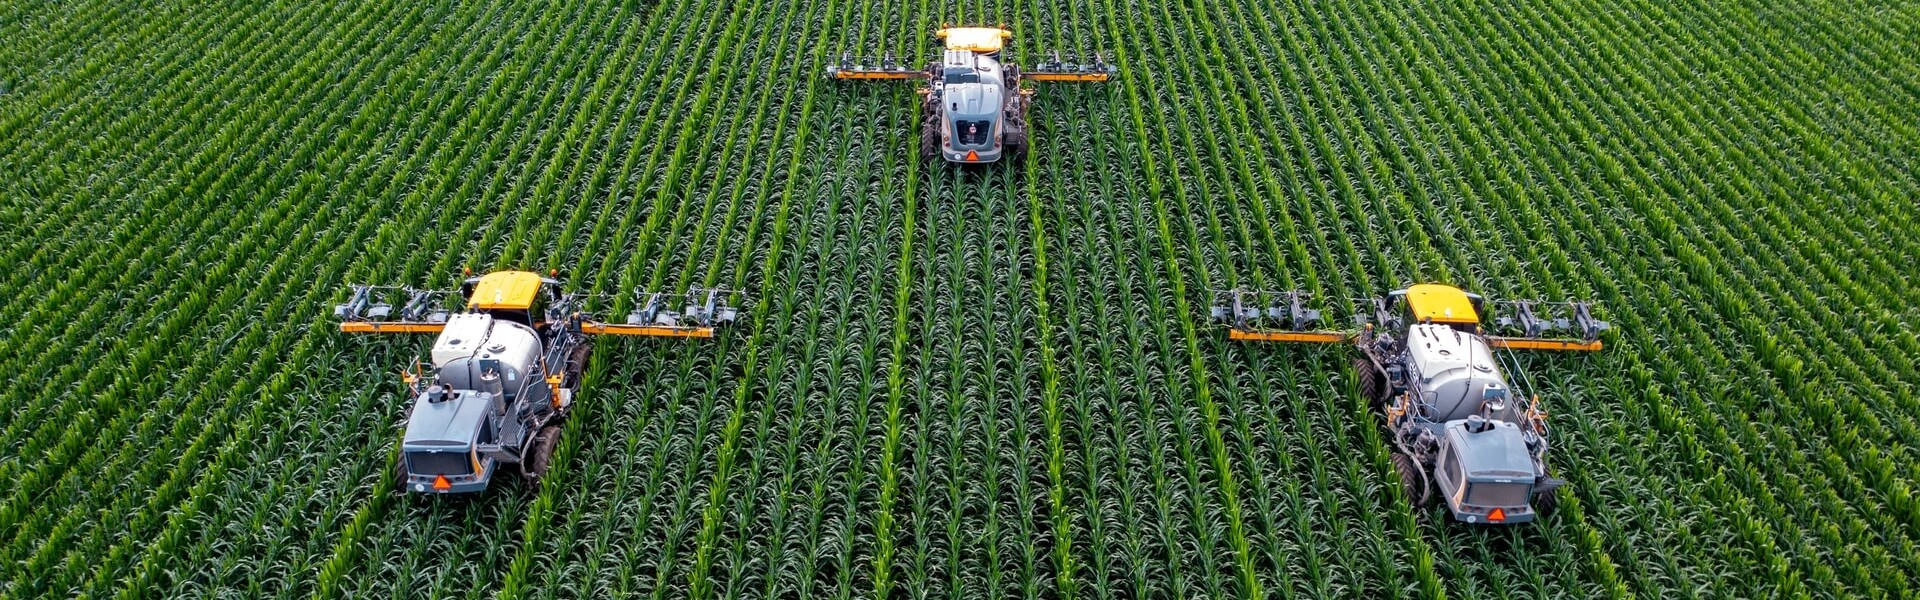 Precision Agriculture Technology, Benefits & Application